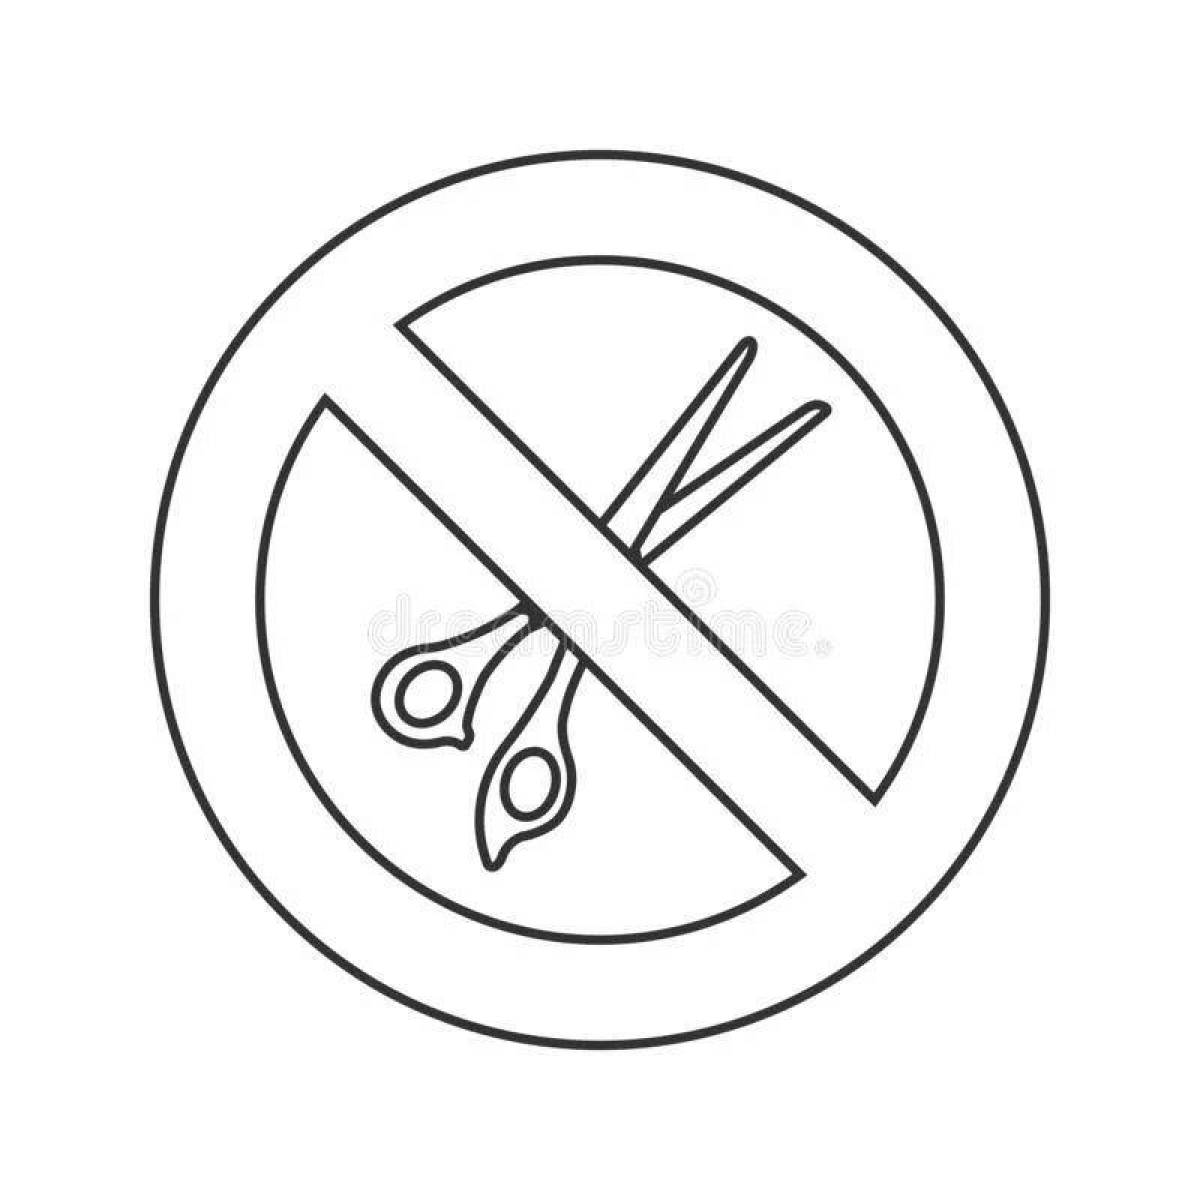 Coloring page stimulating home dangers